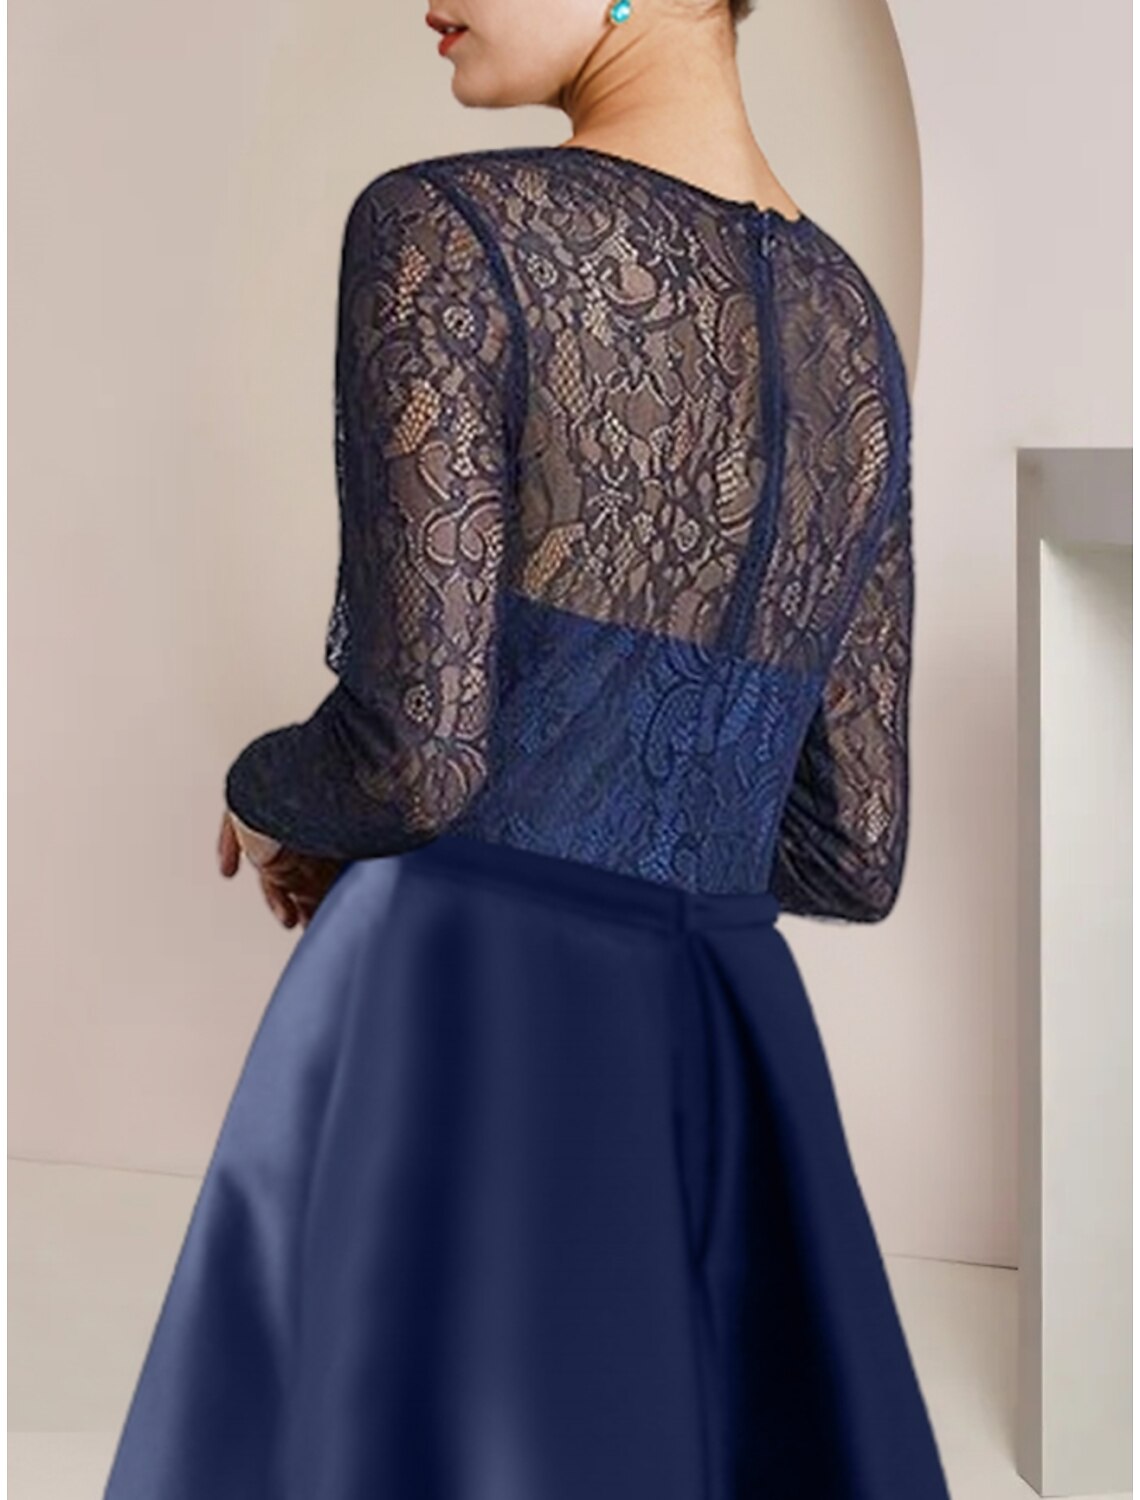 A-Line Mother of the Bride Dress Wedding Guest Party Elegant Jewel Neck Sweep / Brush Train Lace Long Sleeve with Ruching Solid Color